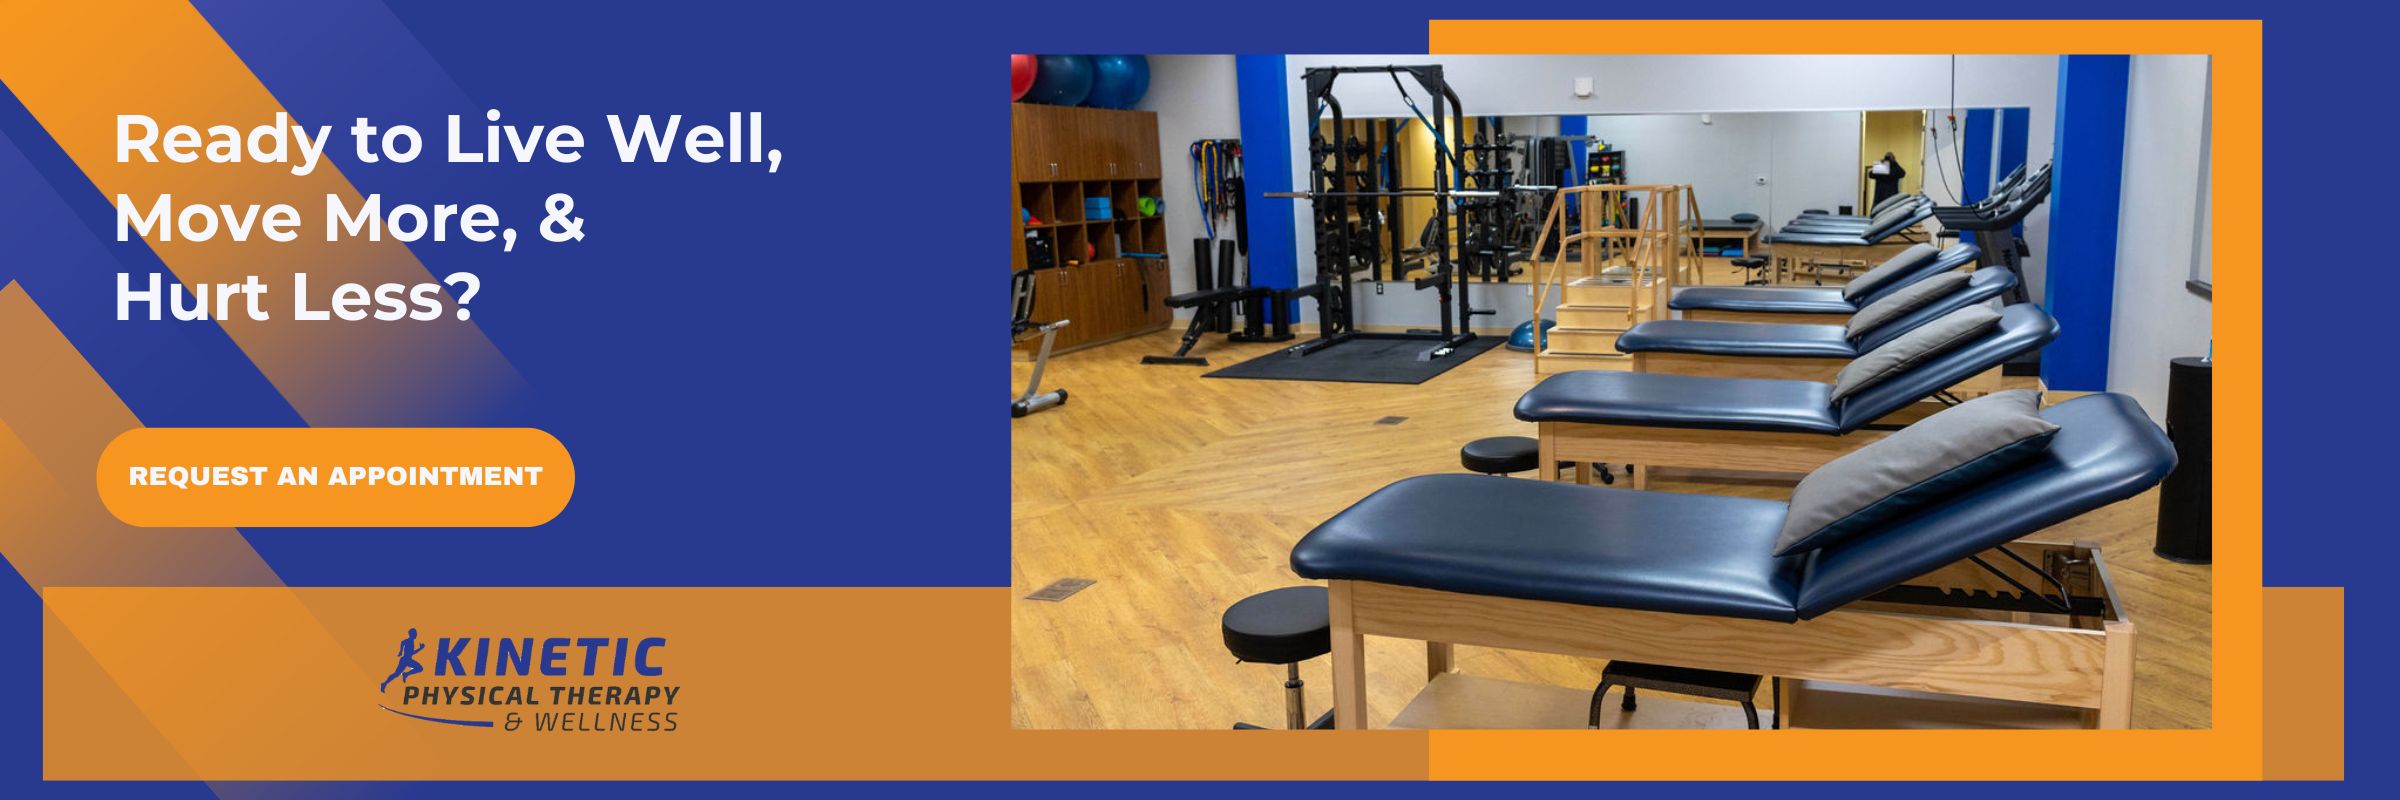 Kinetic Physical Therapy and Wellness Services